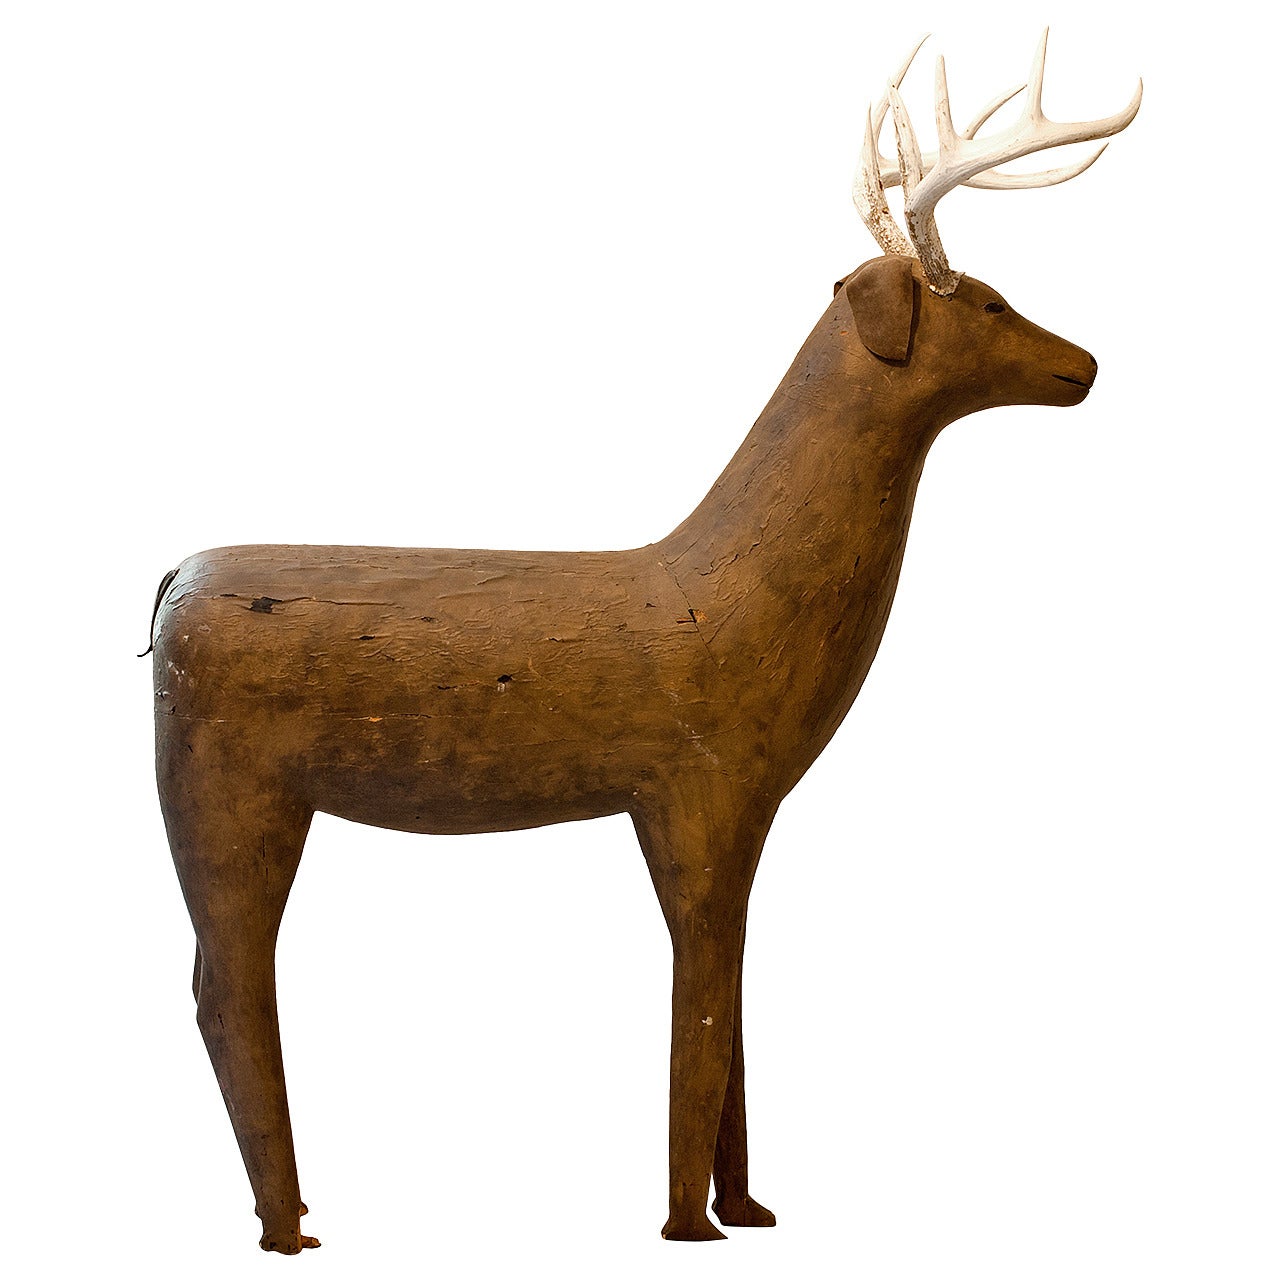 Carved and Painted Primitive Deer